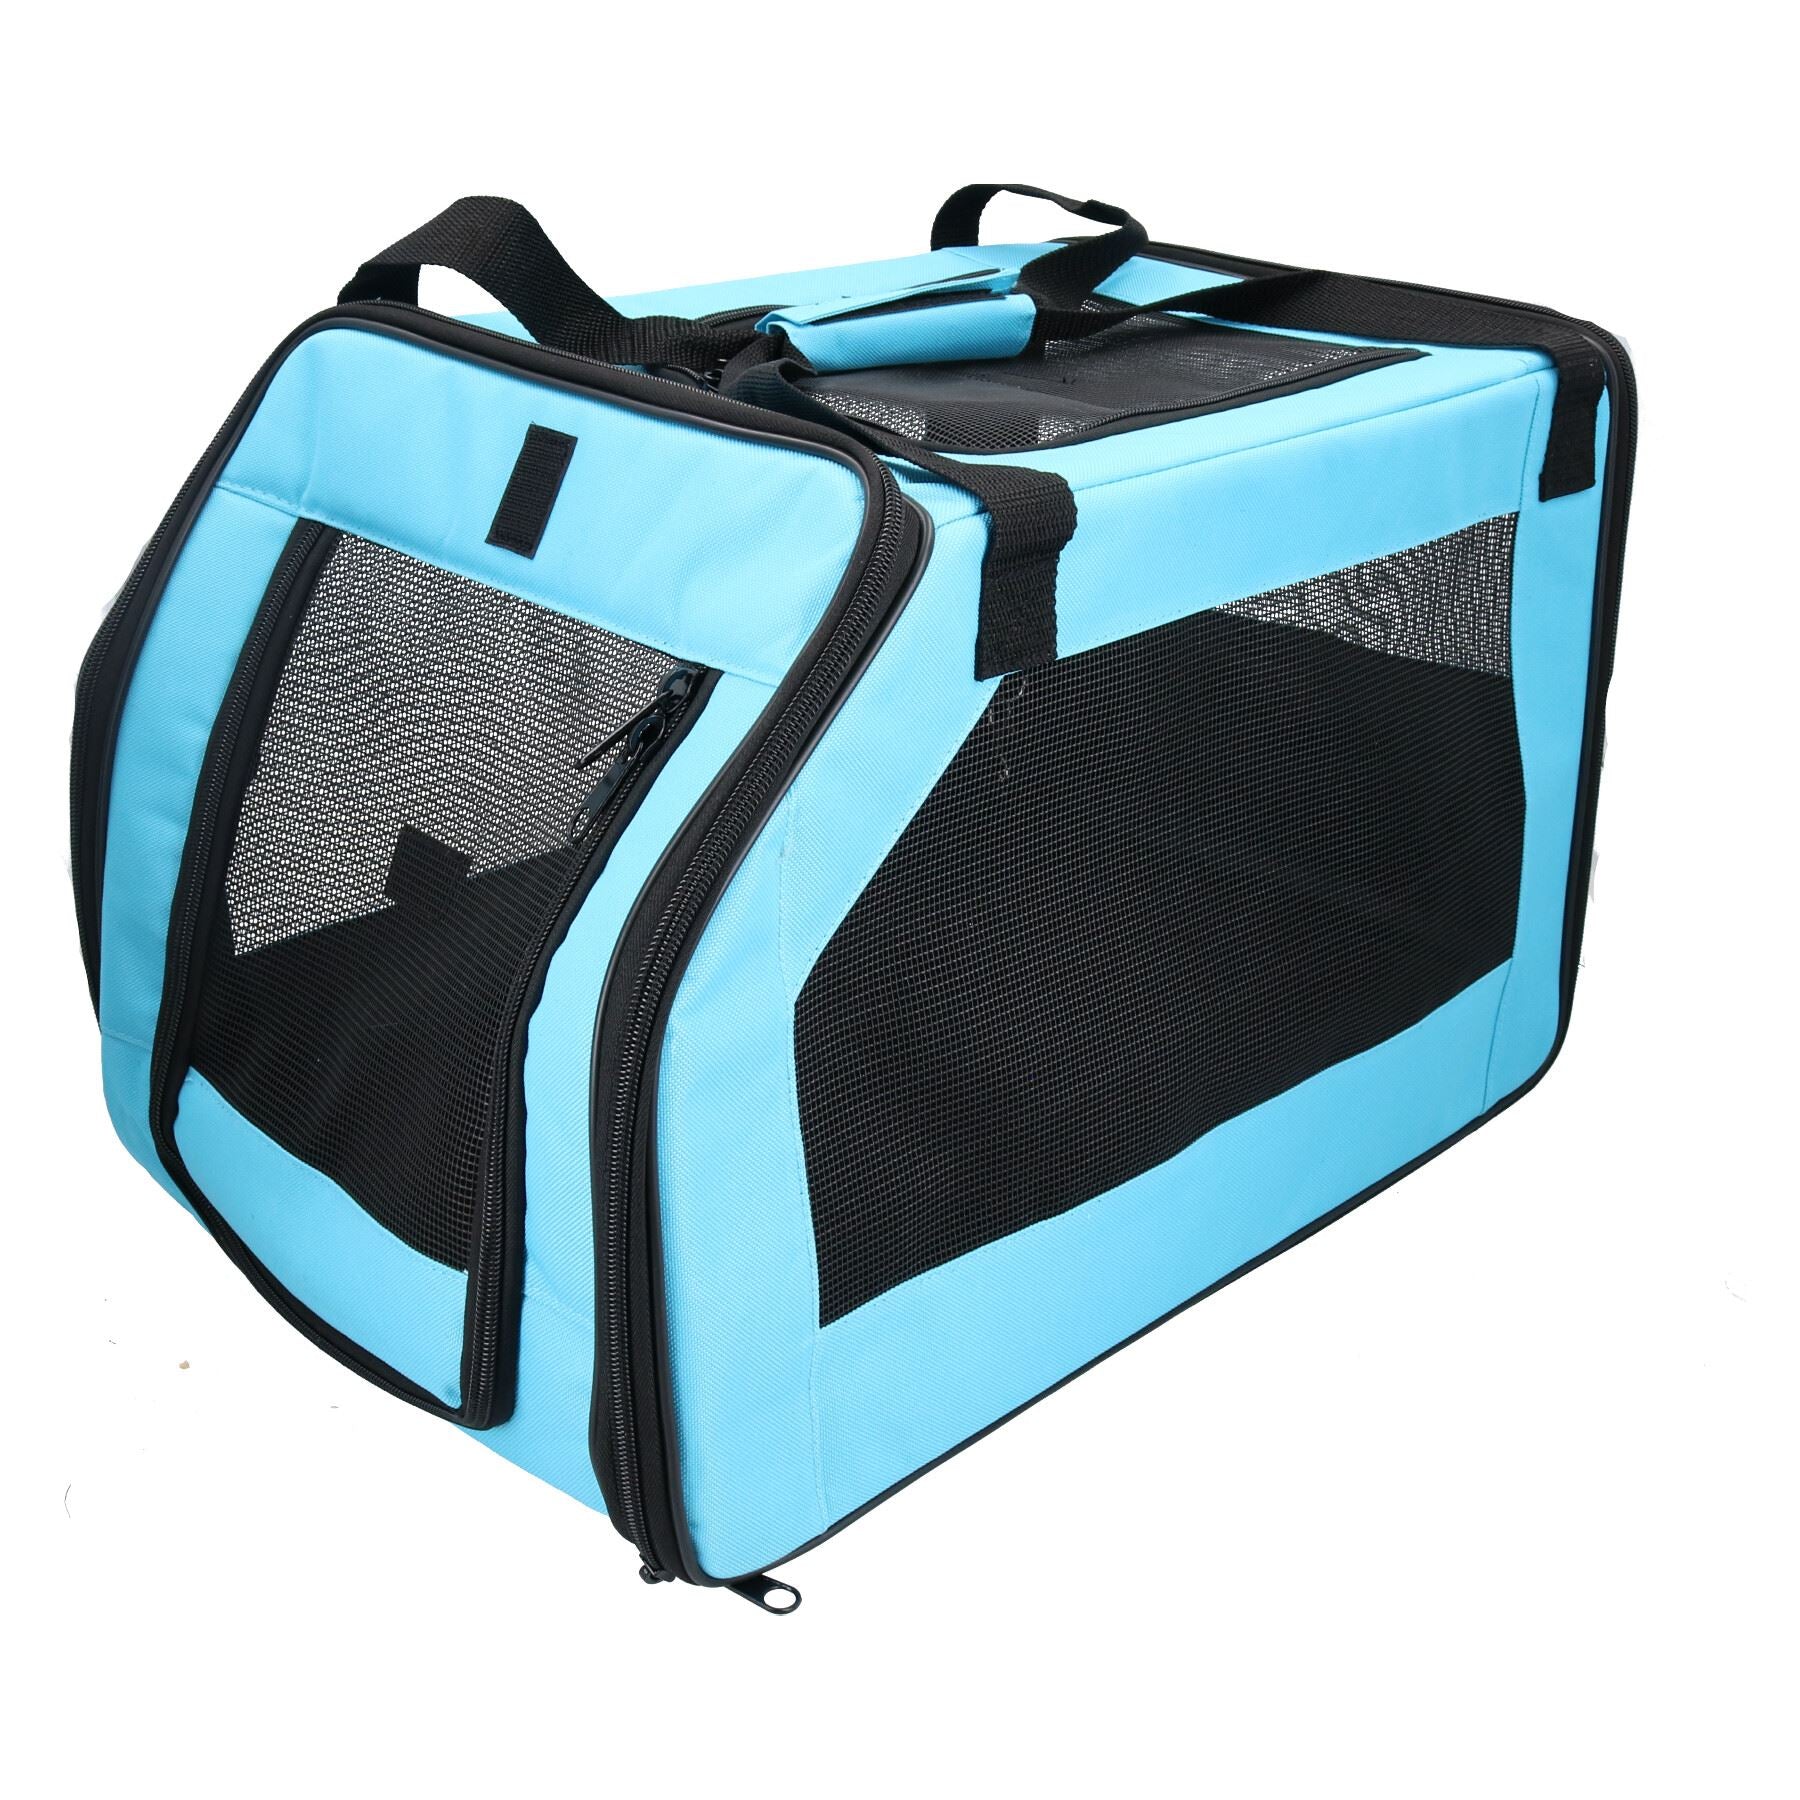 Blue Medium Dog Puppy Travel Car Seat Carrier 30.5x33x51cm For Pets Upto 25lbs